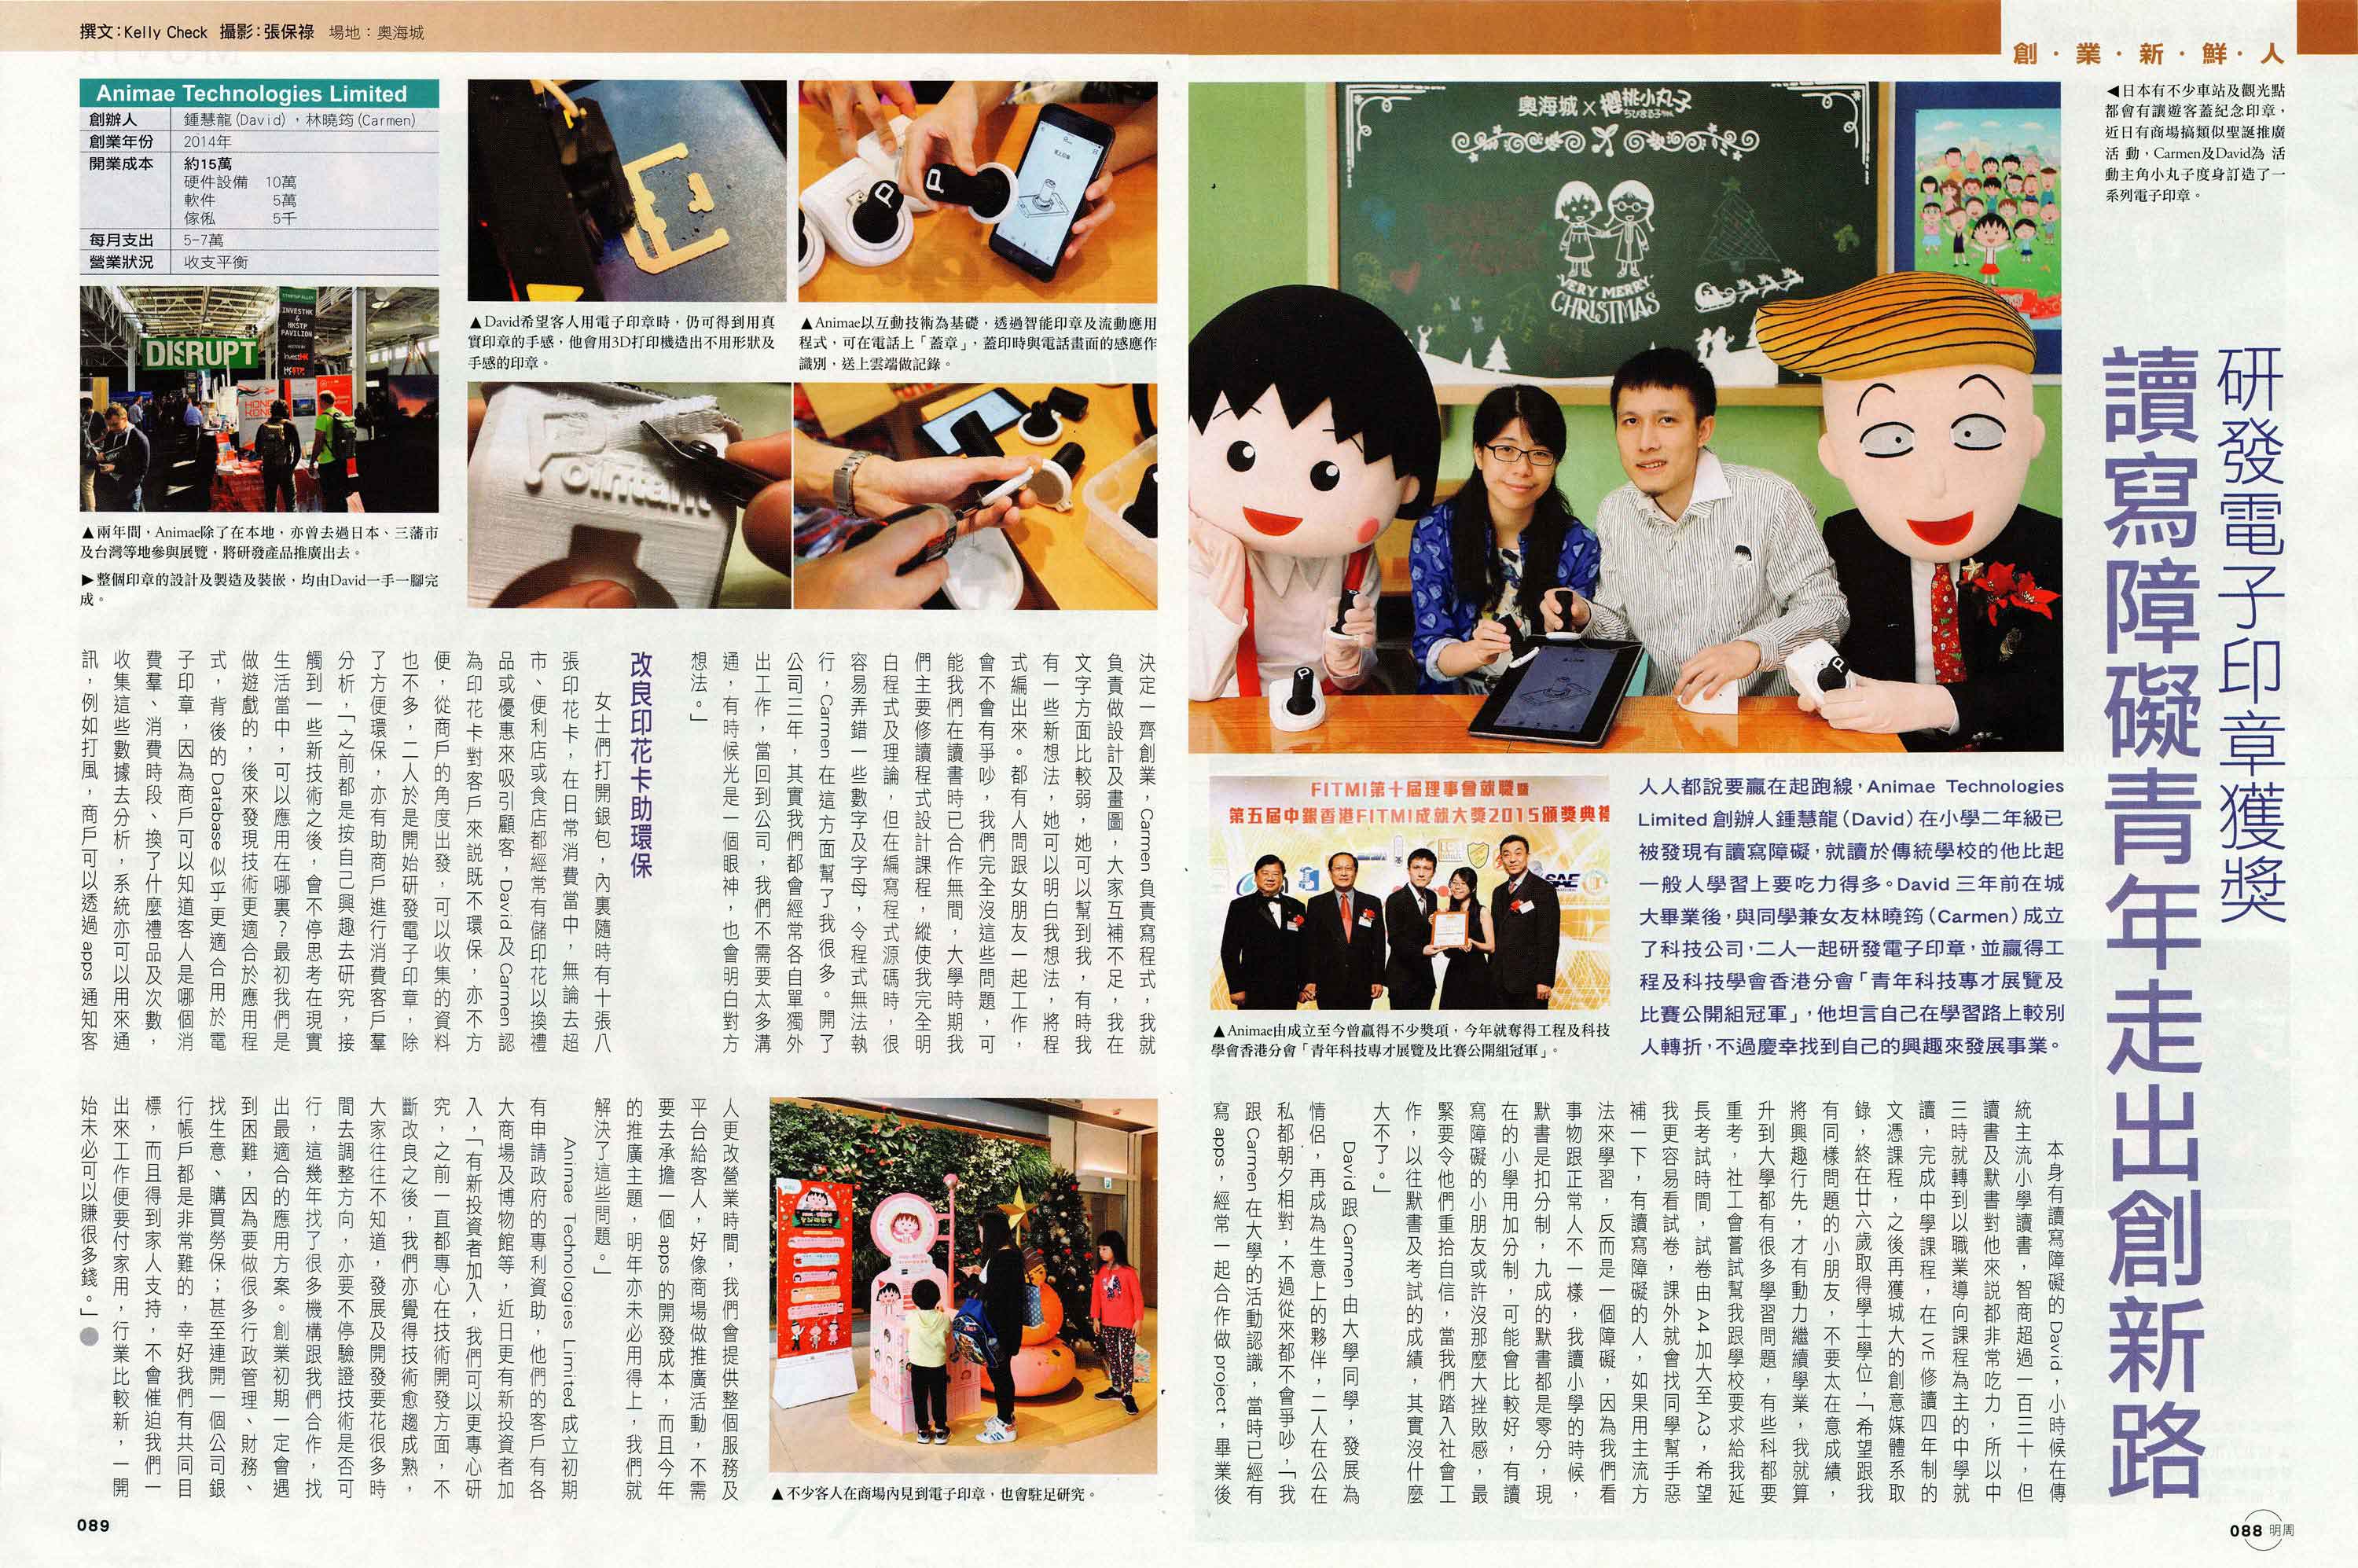 Ming Pao Weekly, 2 December 2017